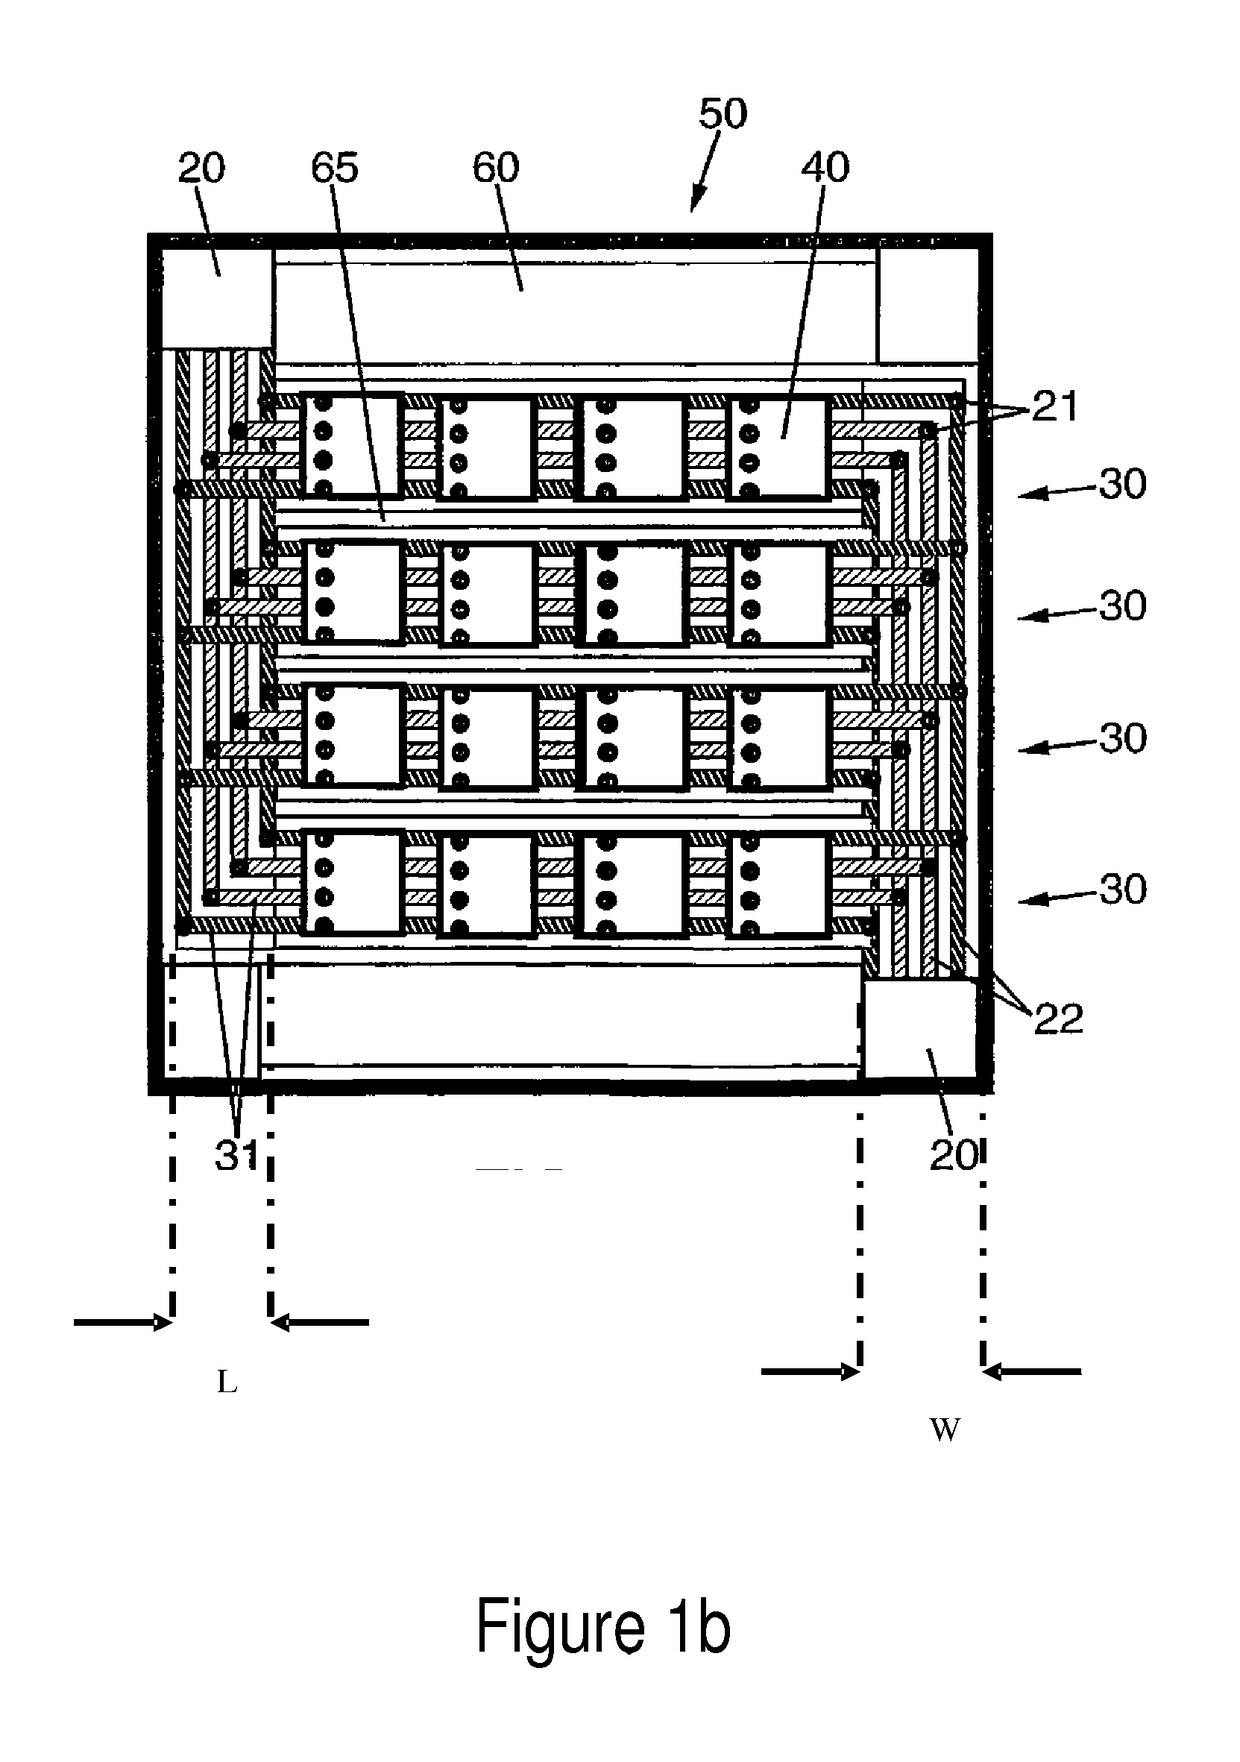 Tiled display, and display tile and carrier substrate for use in same